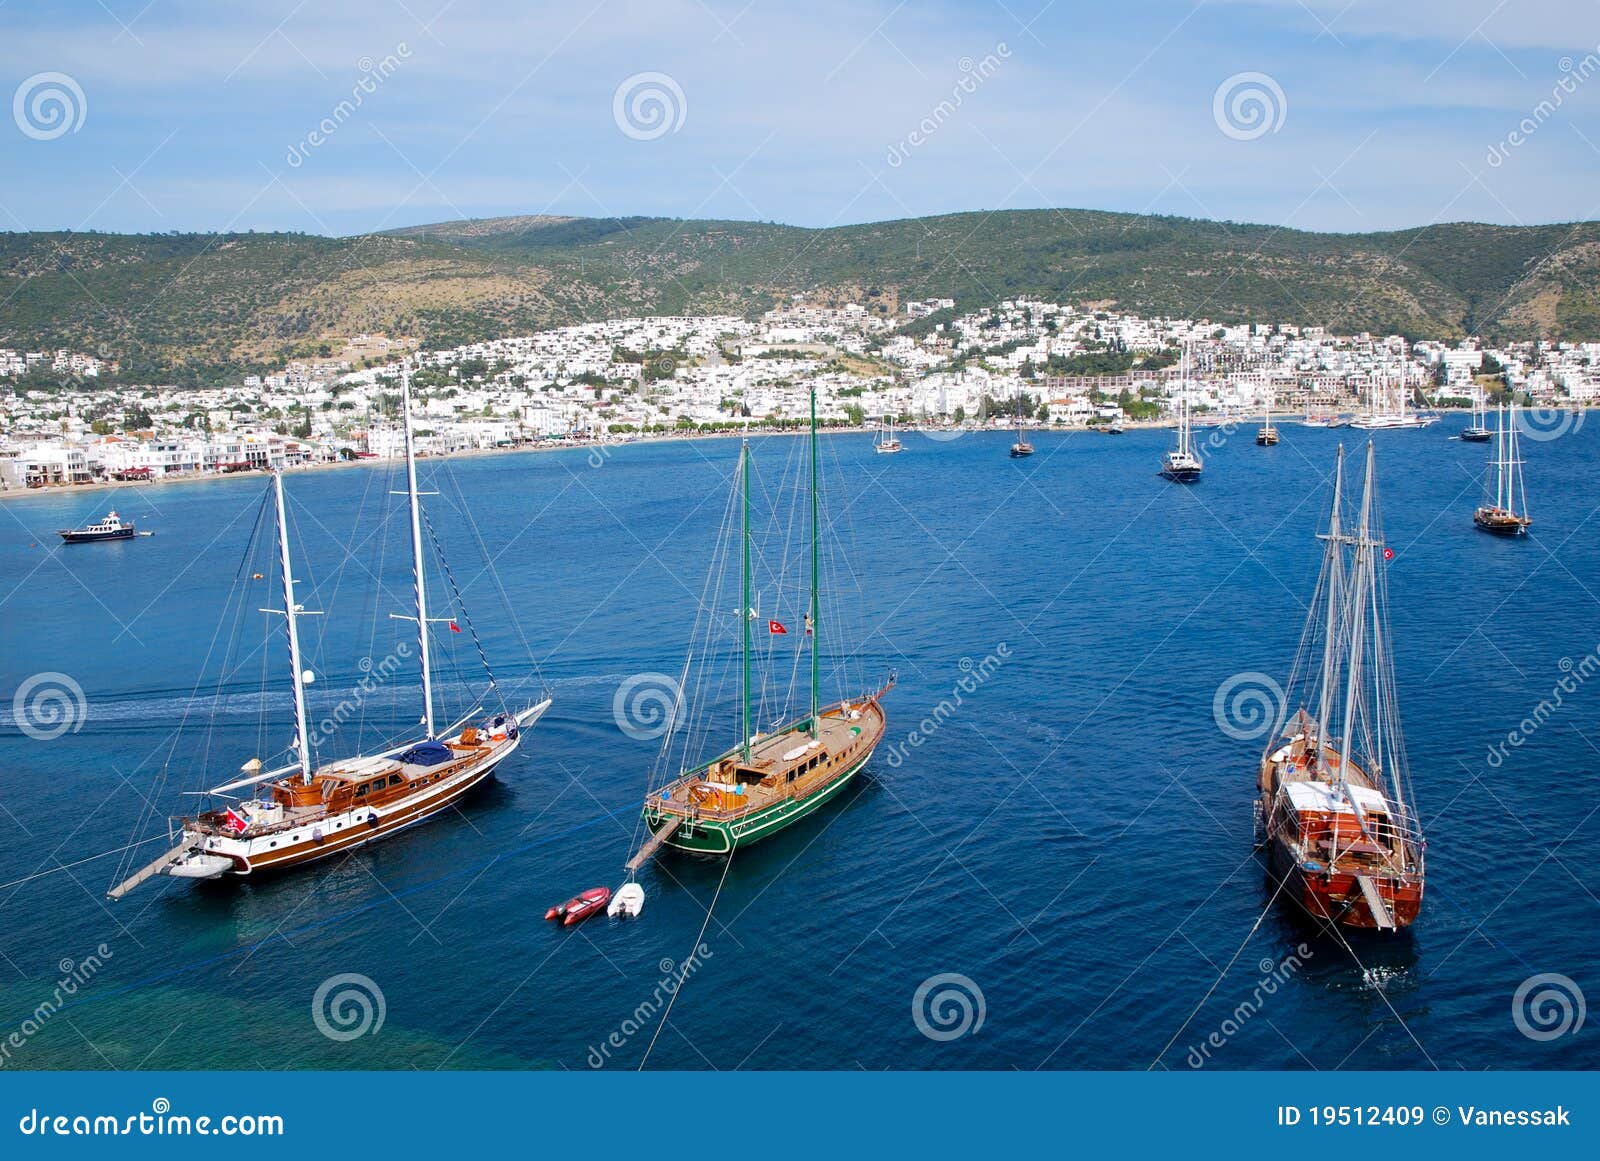 the sea of bodrum